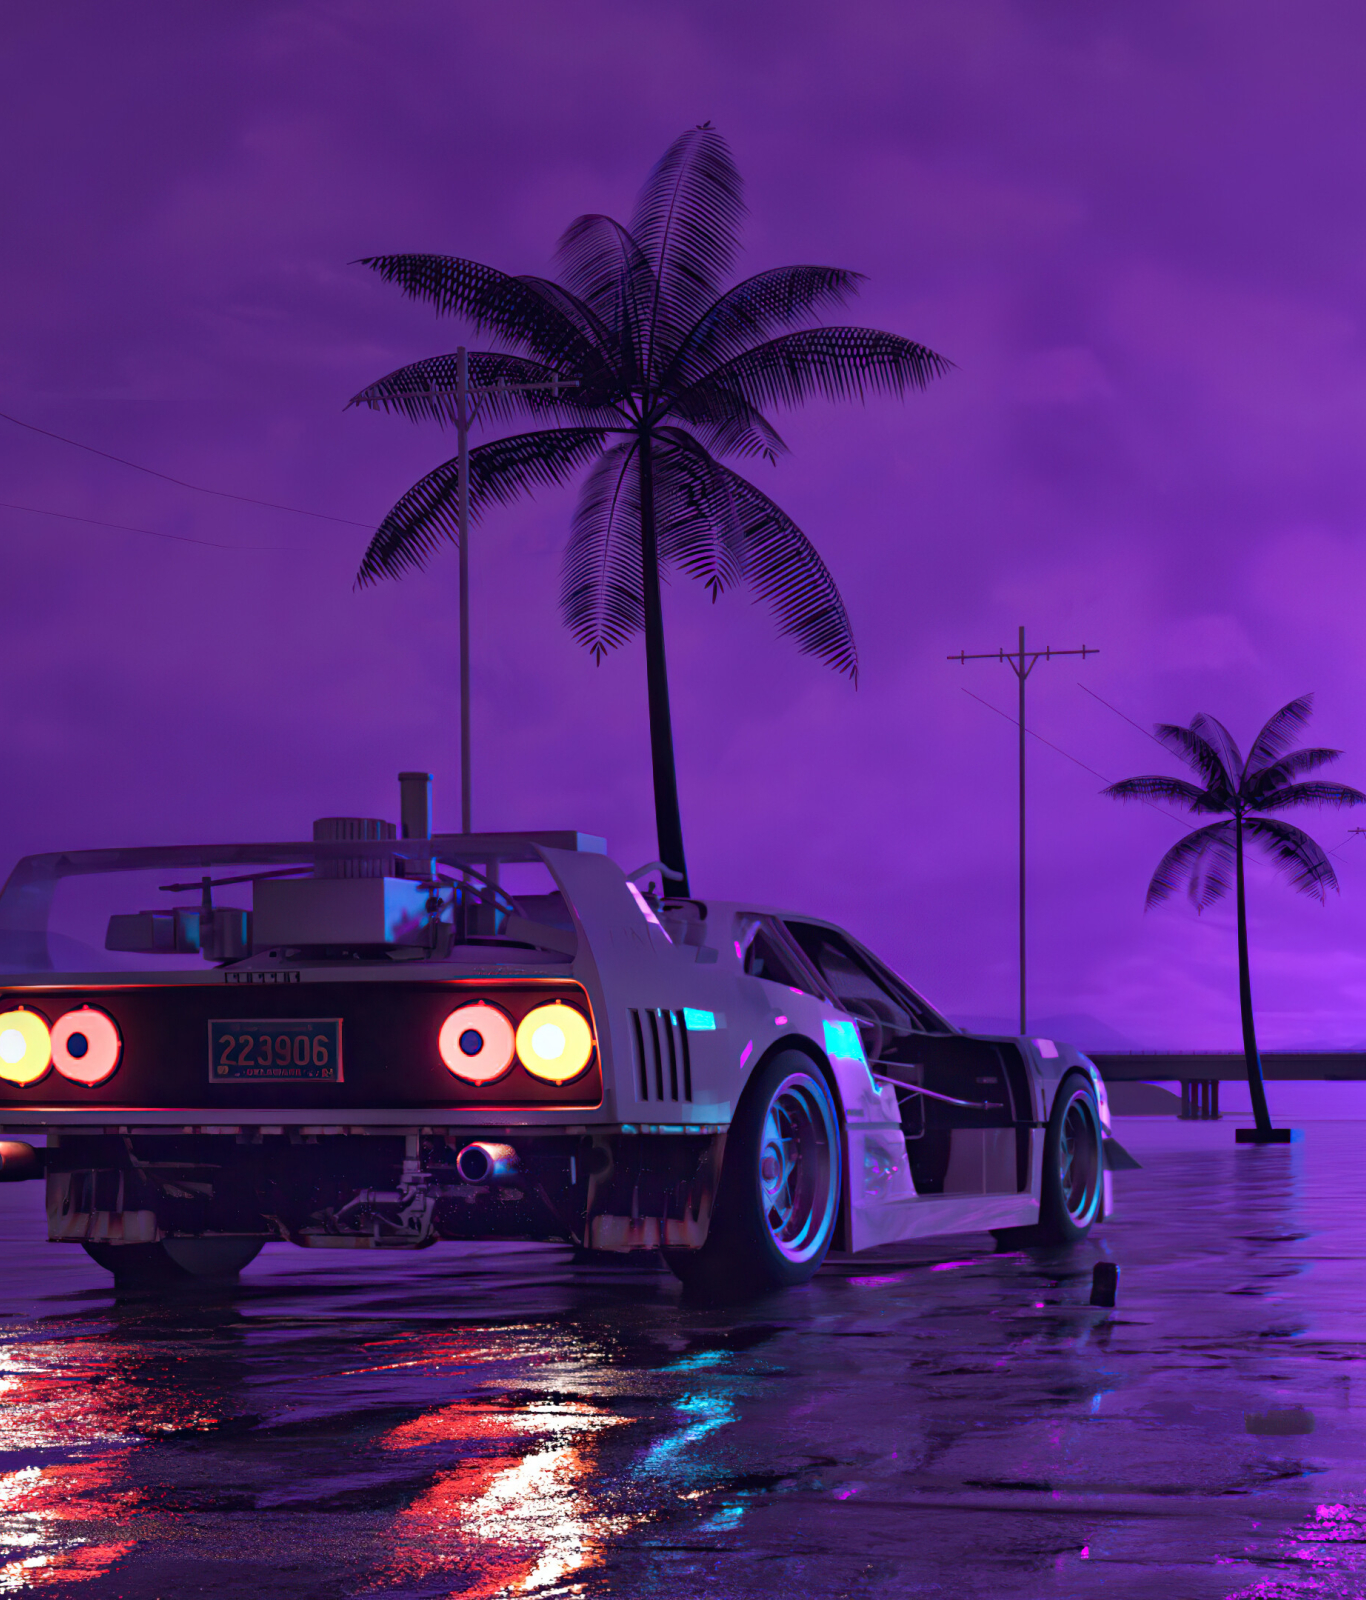 1366x1600 Resolution Retro Wave Sunset and Running Car 1366x1600 ...